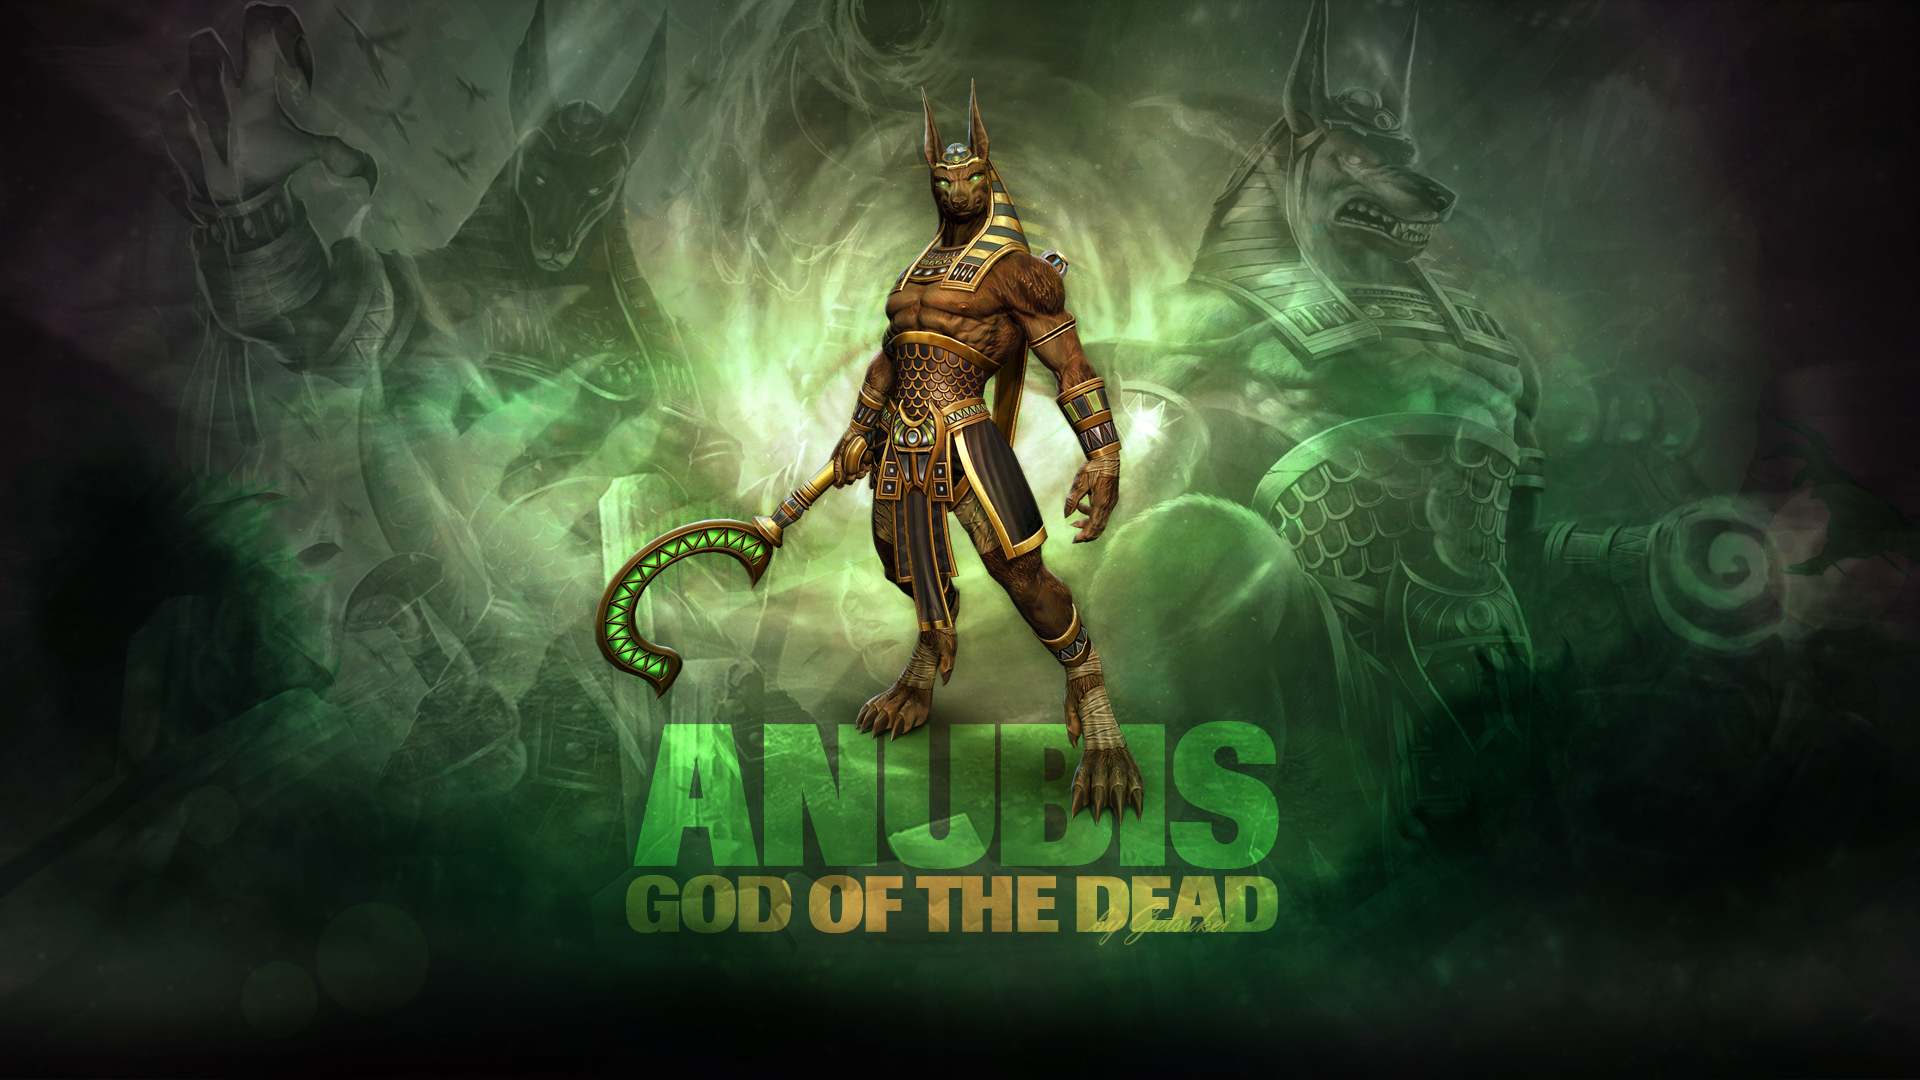 SMITE   Anubis God of the Dead Wallpaper by Getsukeii on